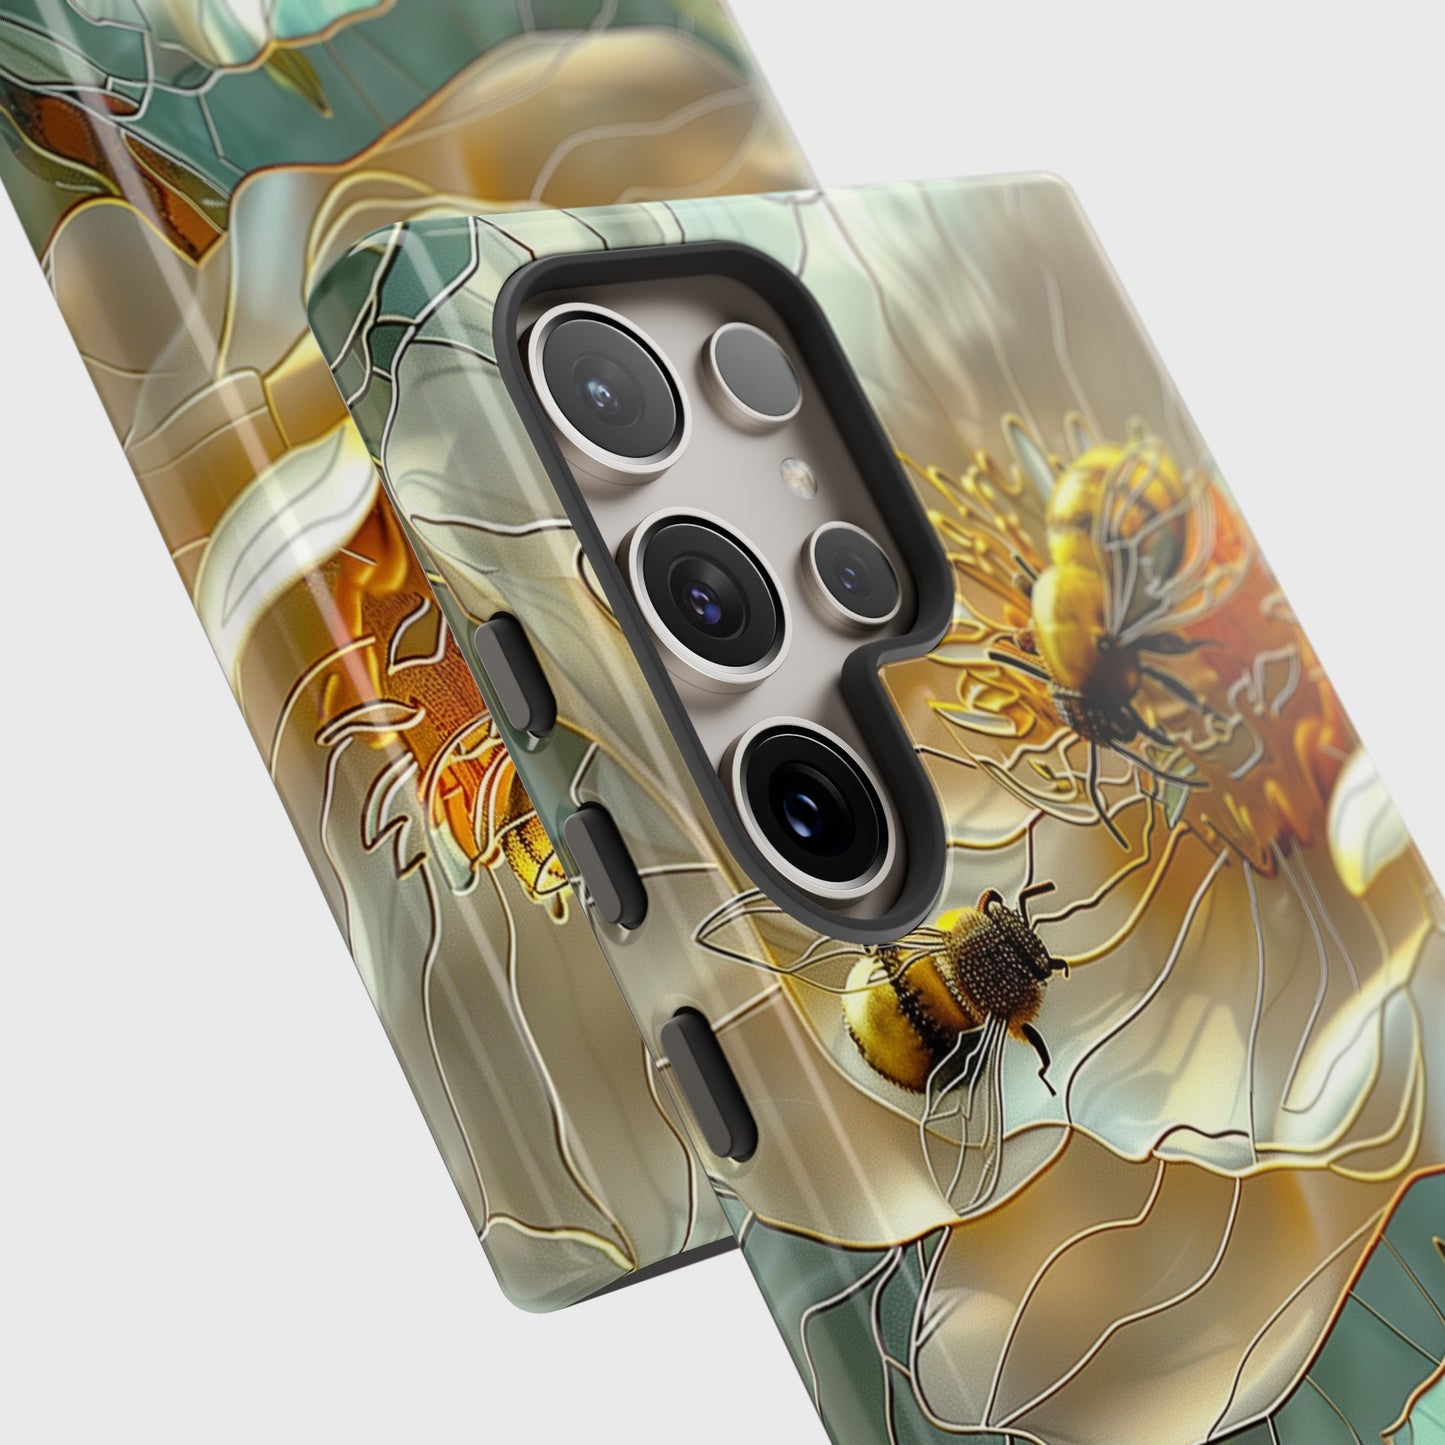 Bees on Flower Stained Glass Design Samsung Phone Case